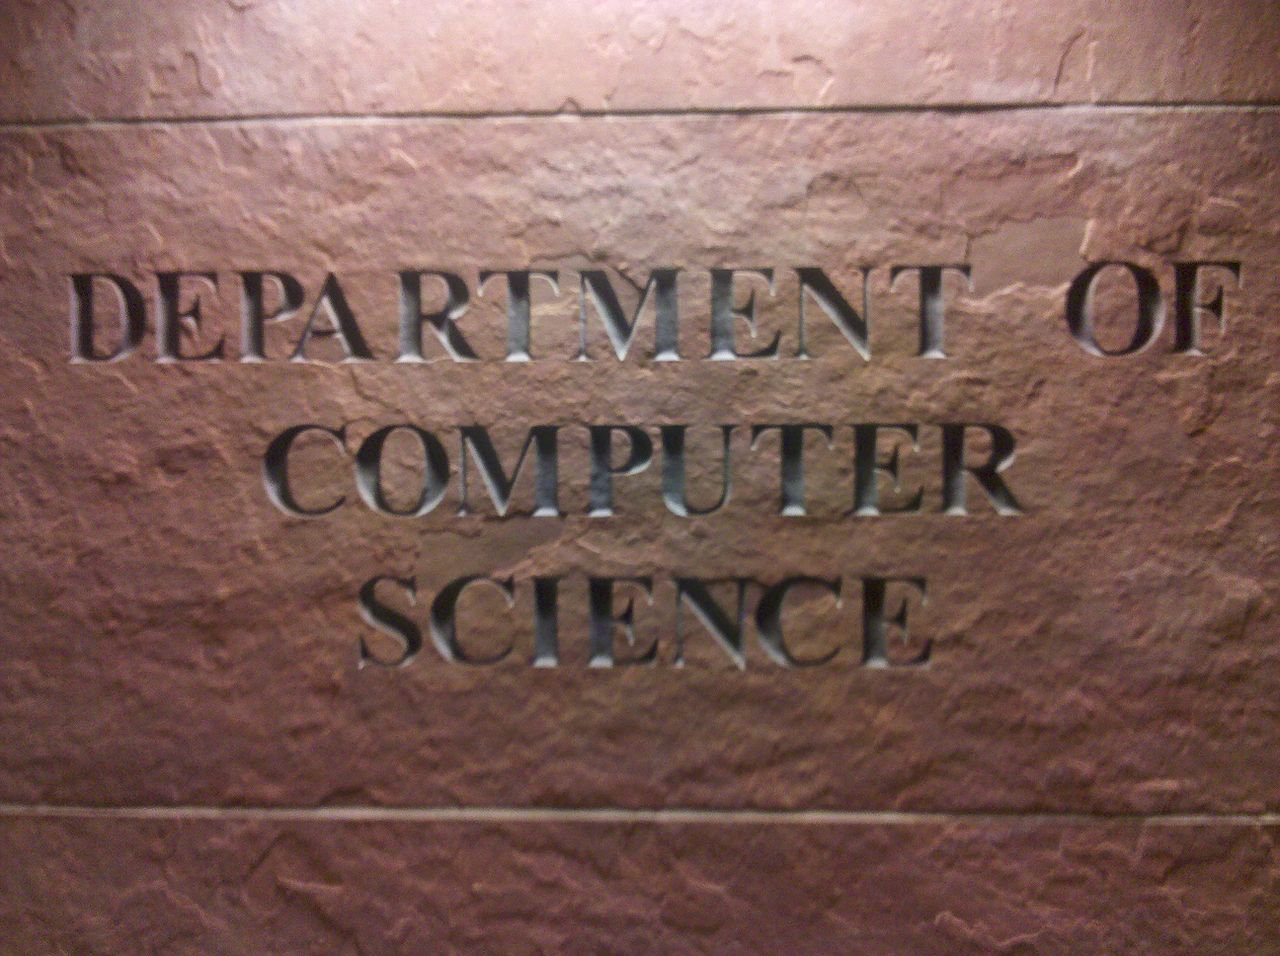 Photo of the name "Department of Computer Science"